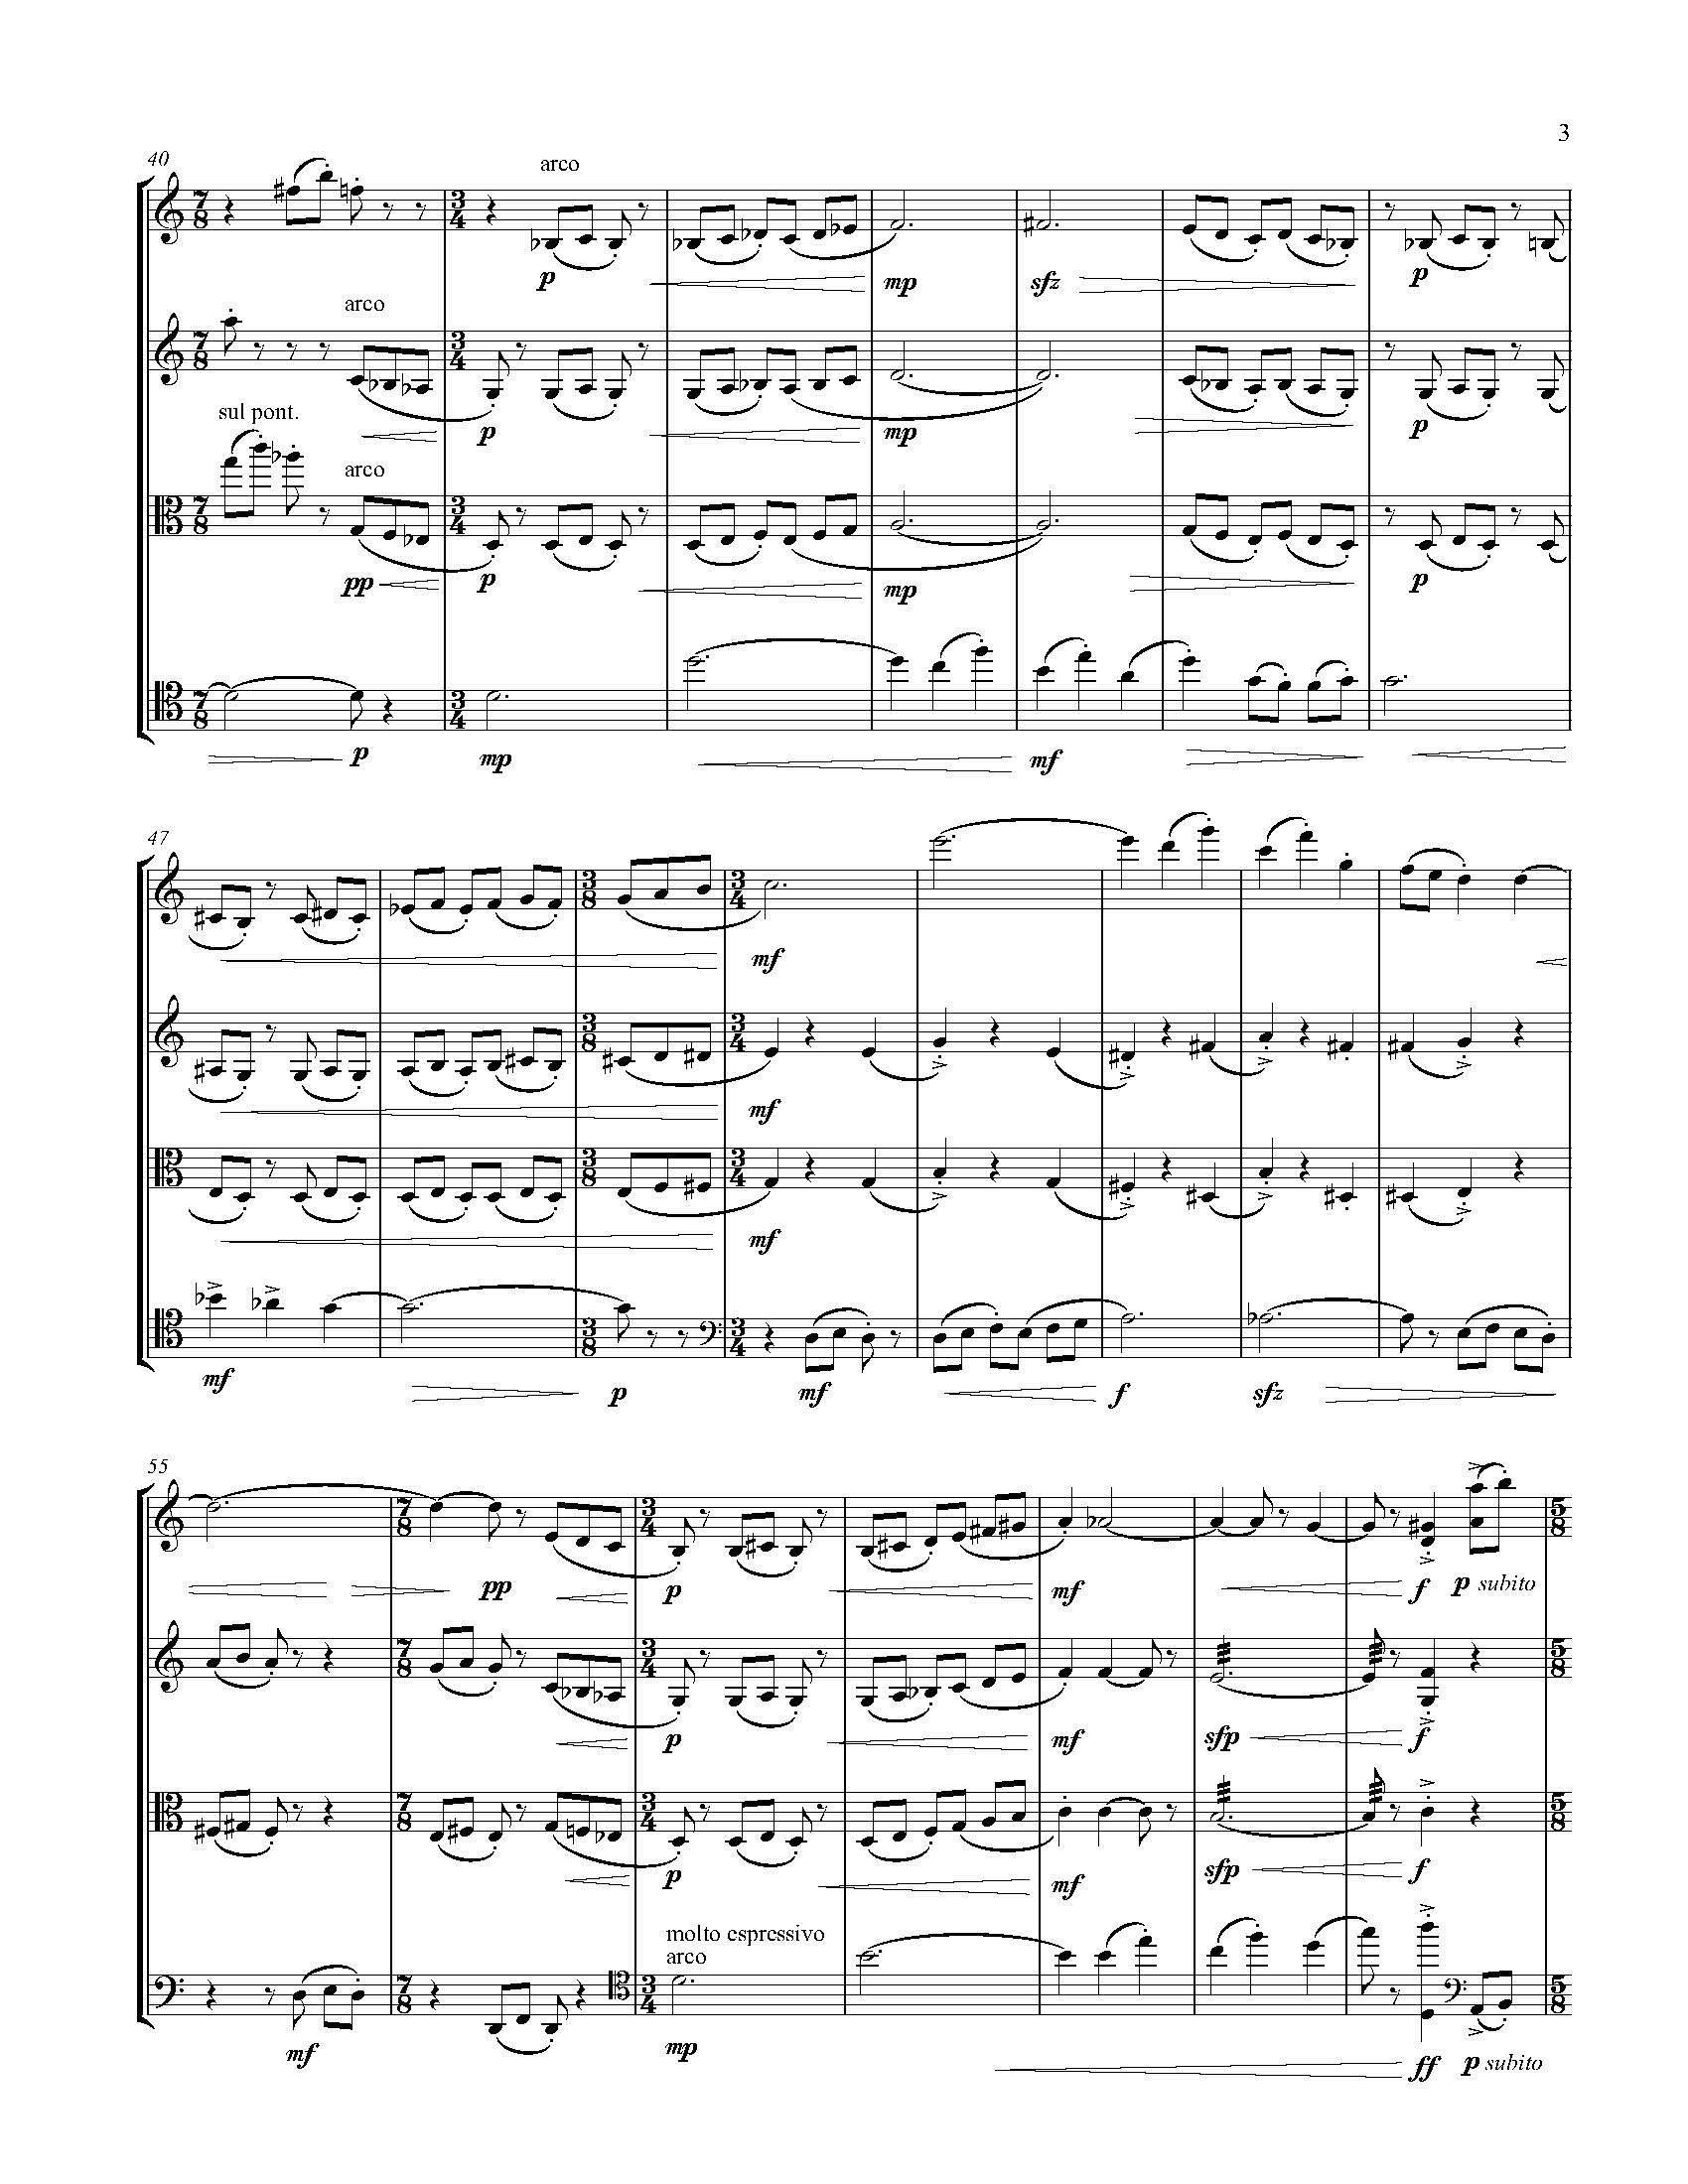 A Country of Vast Designs - Complete Score_Page_09.jpg